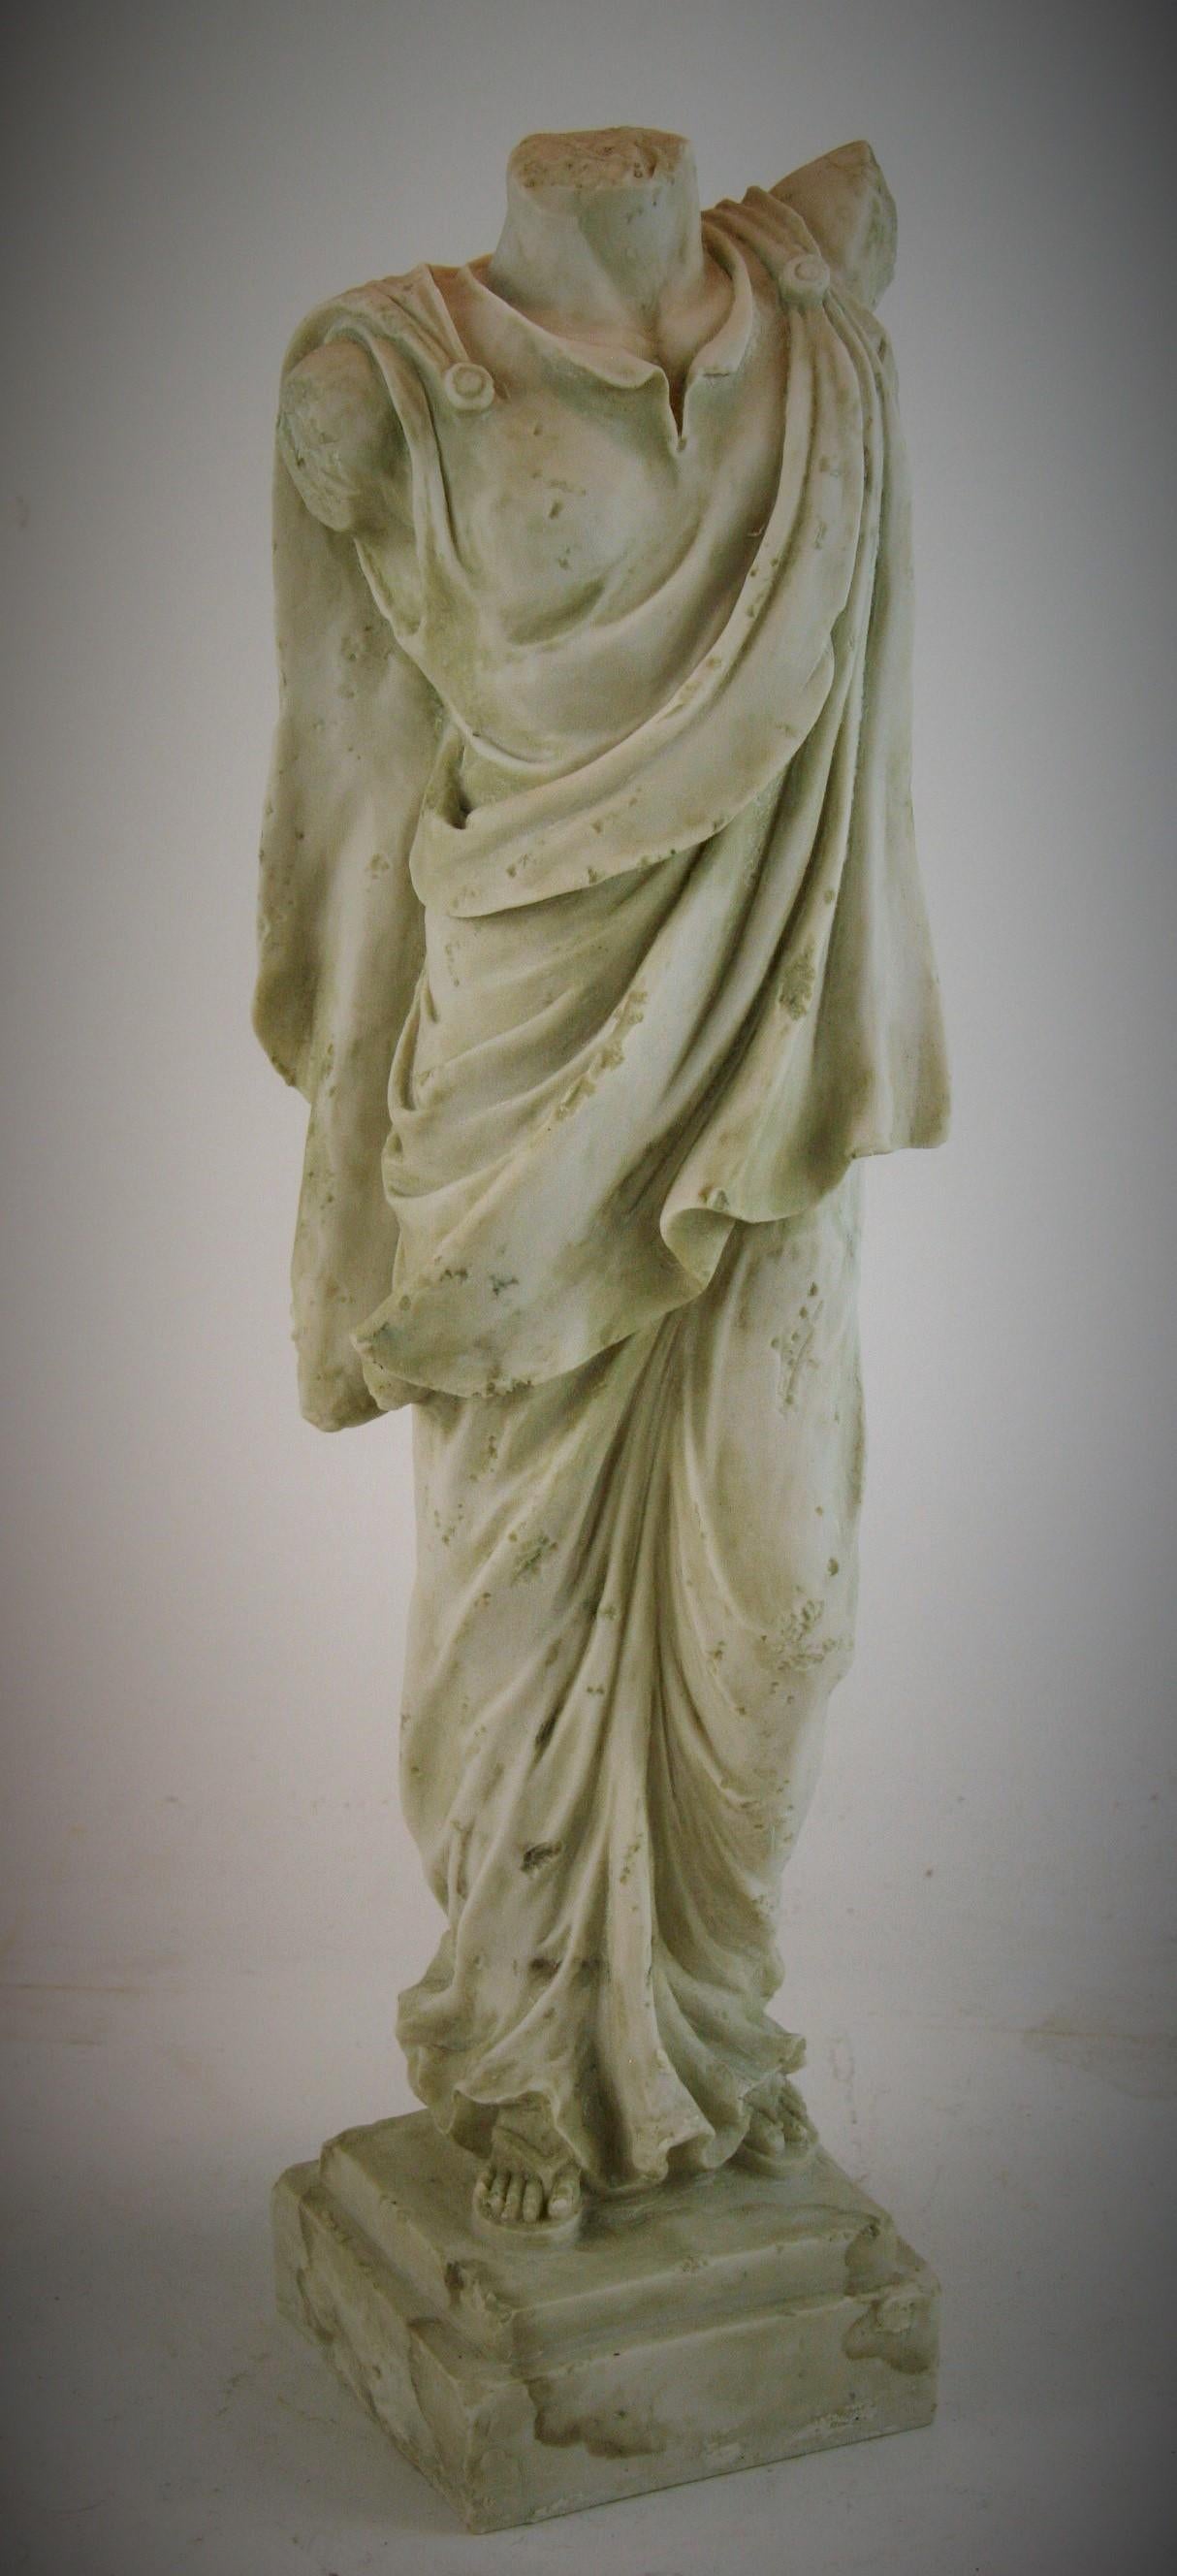 3-454 classical Roman female sculpture made of resin.